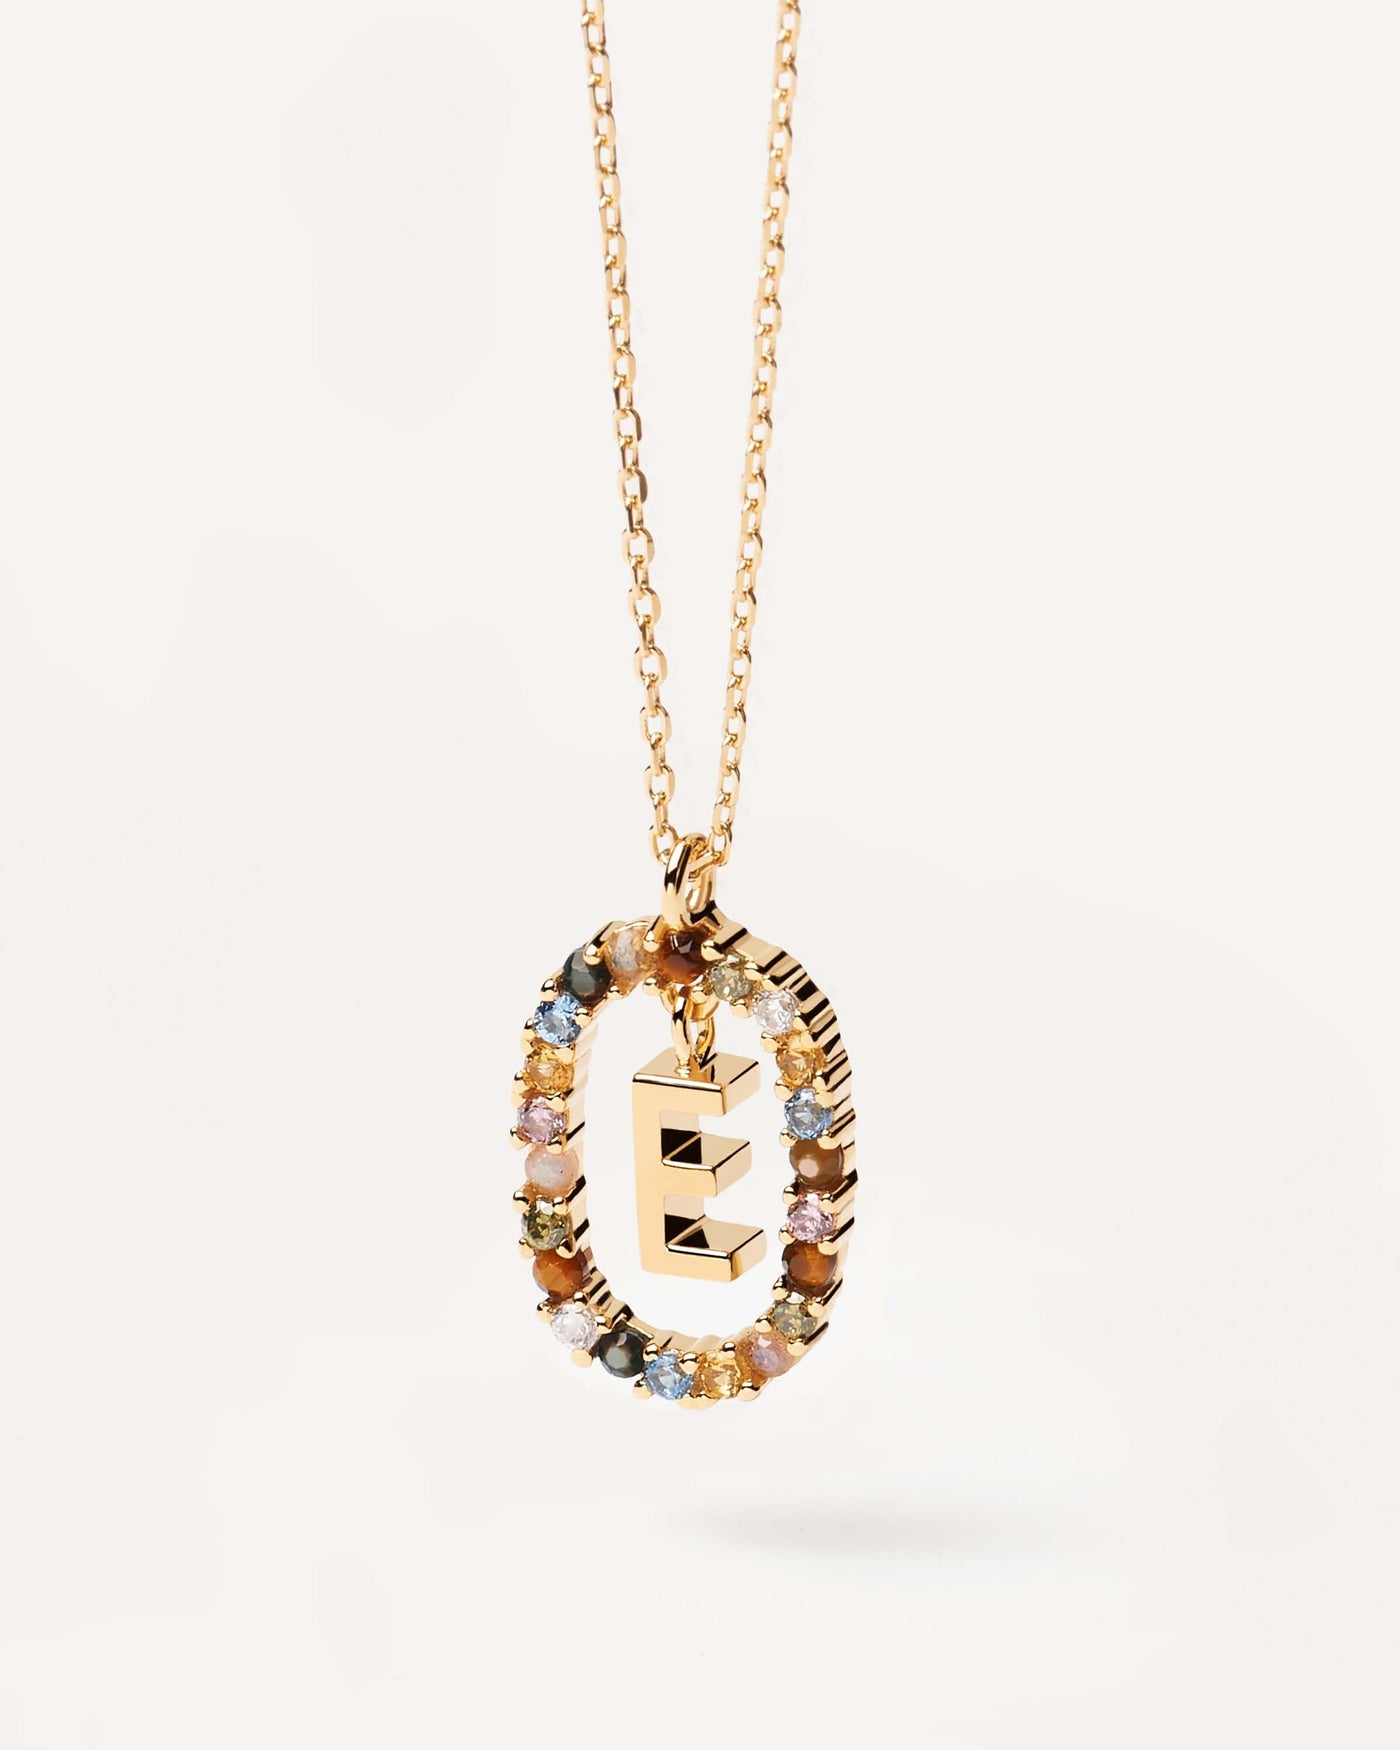 2023 Selection | Letter E necklace. Initial E necklace in gold-plated silver, circled by colorful gemstones. Get the latest arrival from PDPAOLA. Place your order safely and get this Best Seller. Free Shipping.